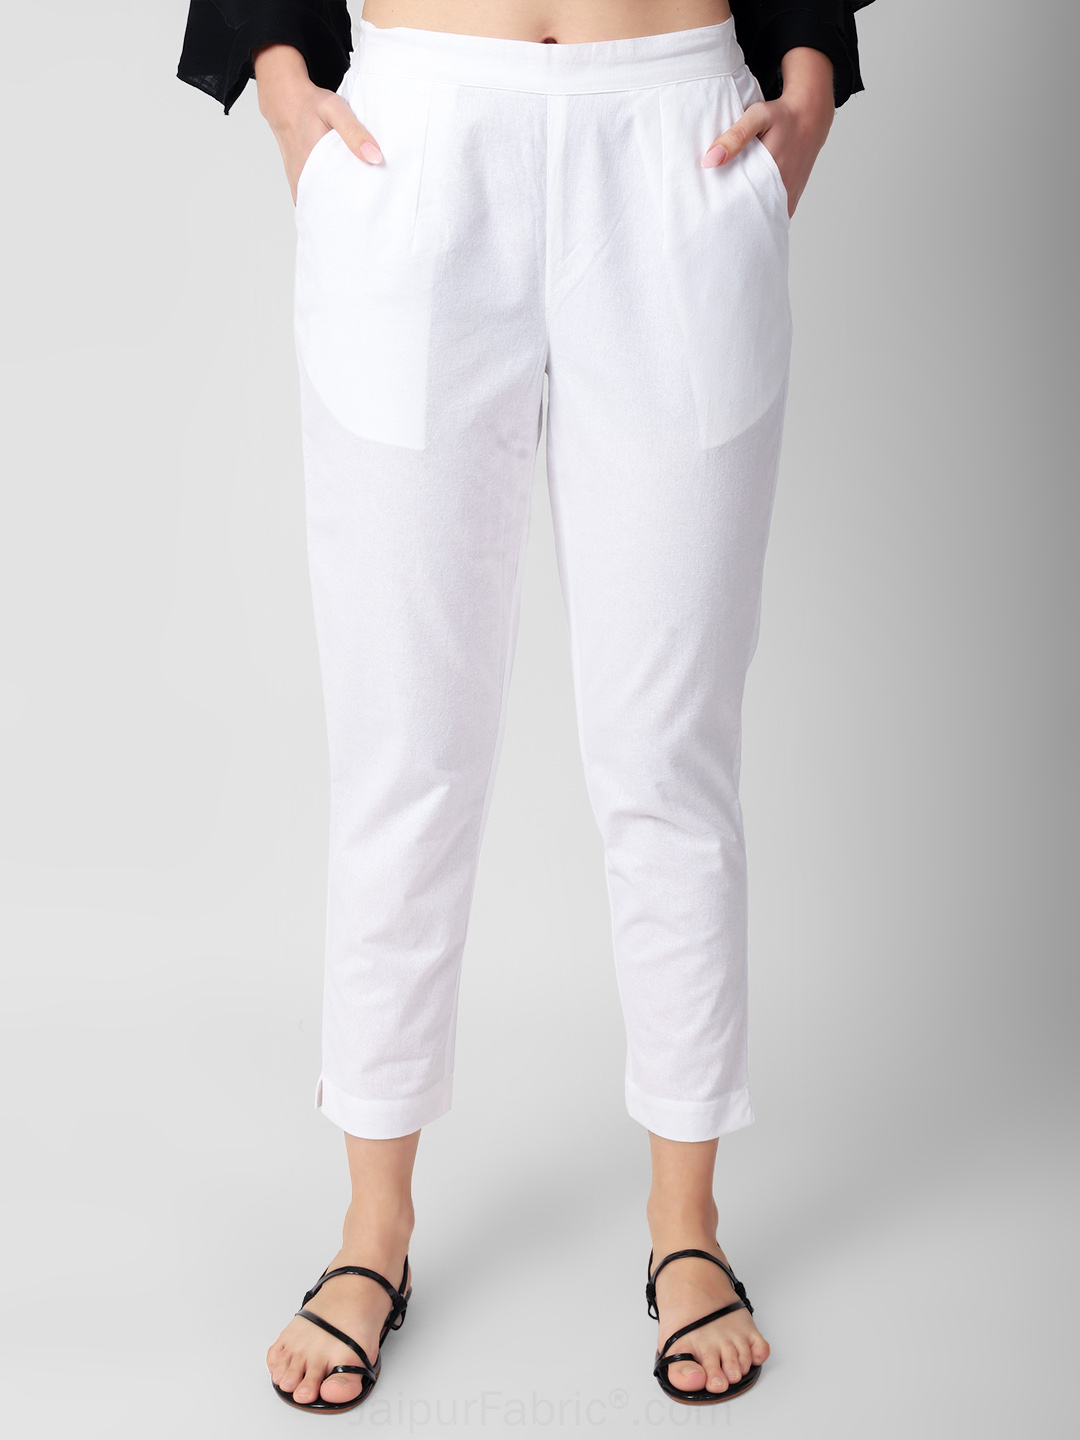 Snow White Women Cotton Pants casual and semi formal daily trousers